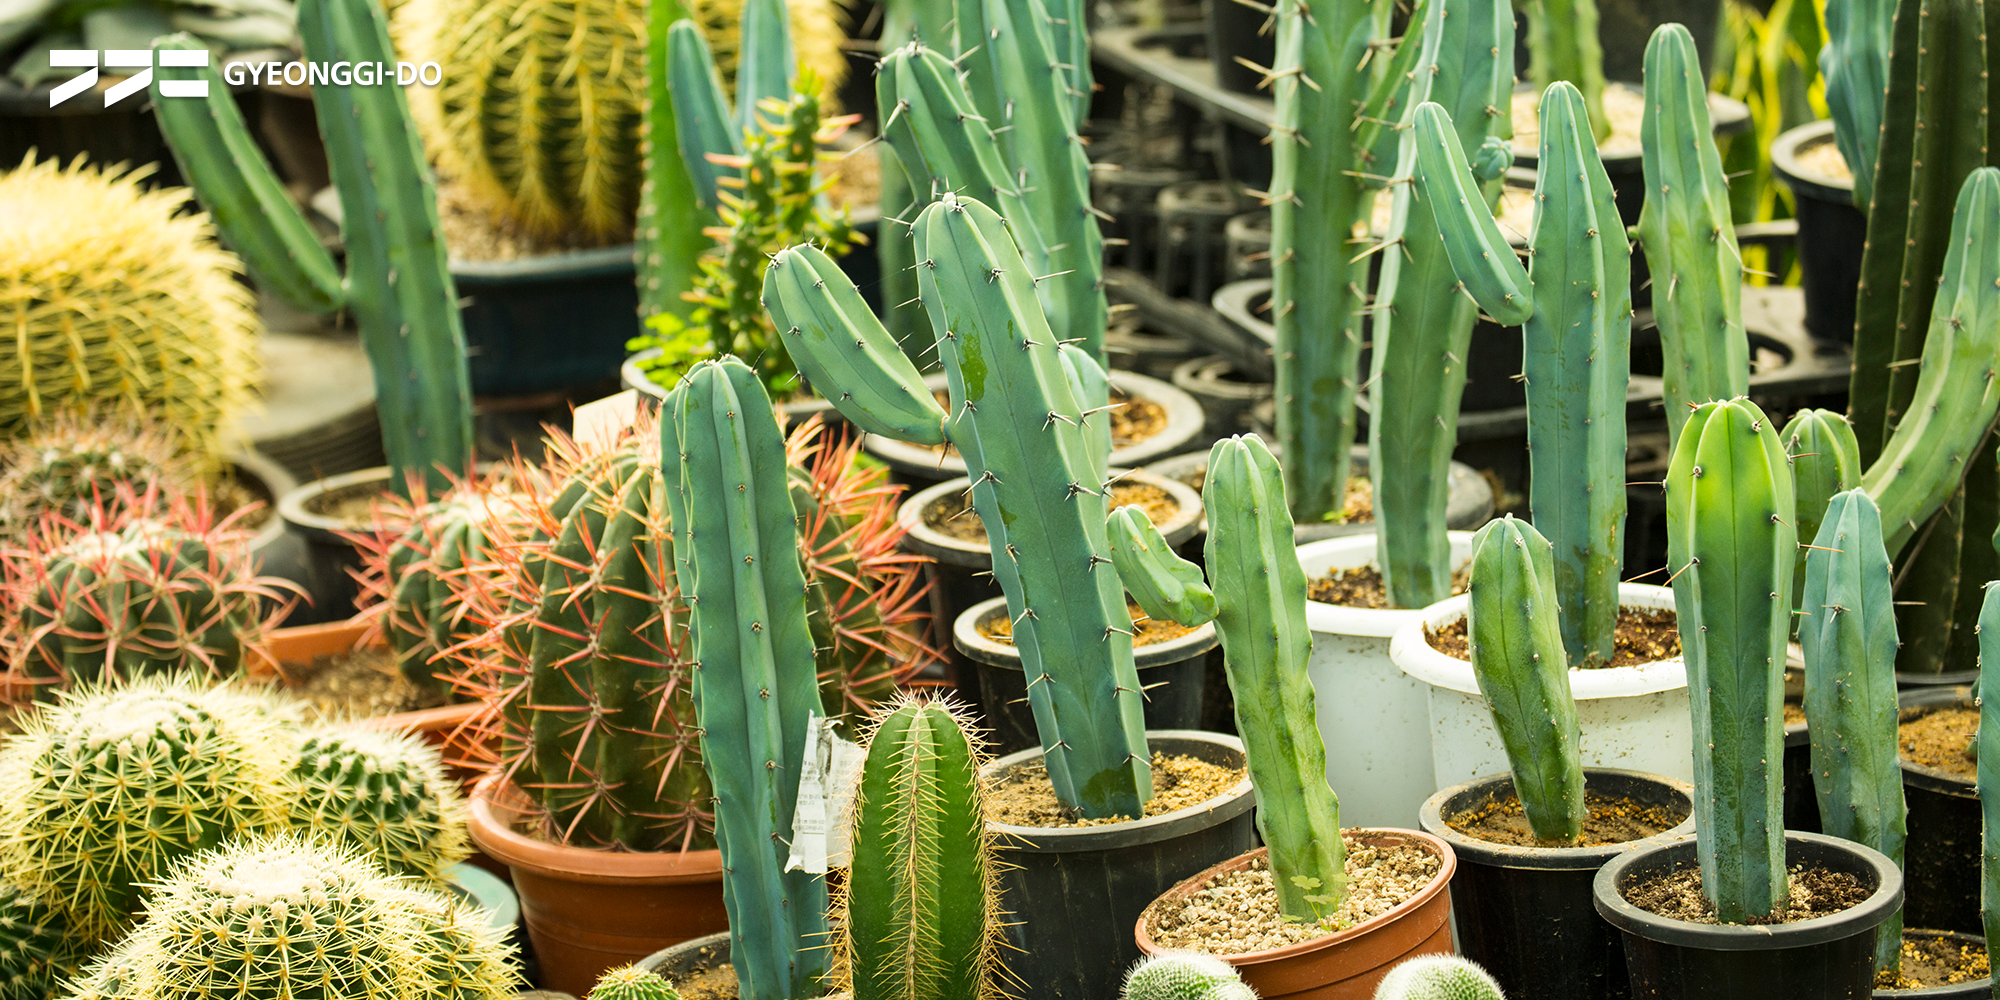 The Gyeonggi-do Agricultural Research & Extension Services (GARES) has announced that it will be hosting the ‘18th Cactus Festival’ to reflect the planterior trend.